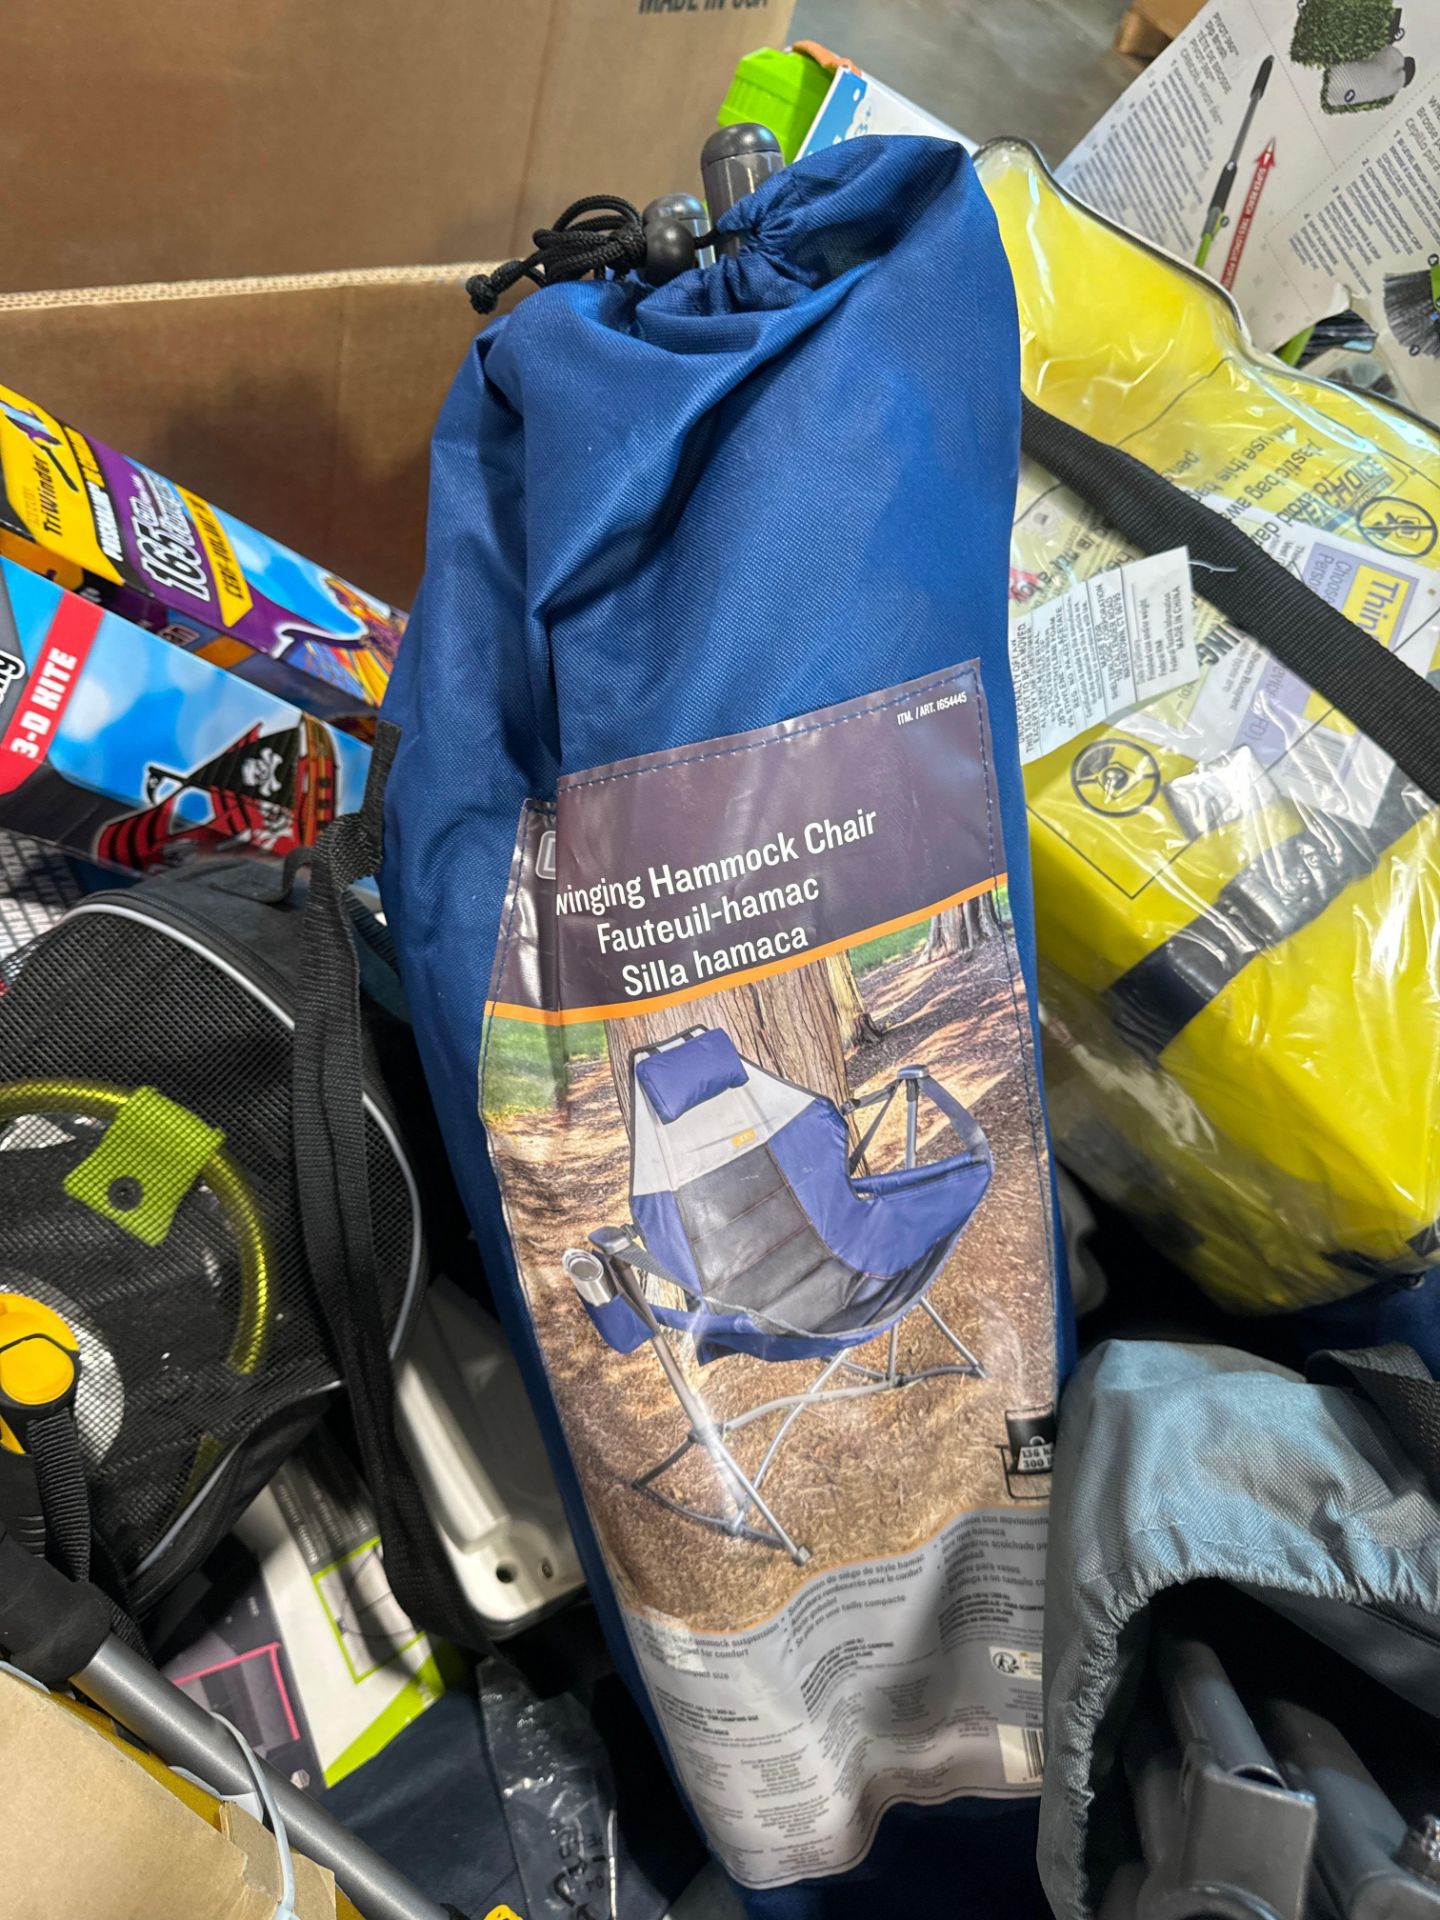 Kites, life jackets, car wash accessories, chairs, hiking poles, golf gloves and more - Image 6 of 10